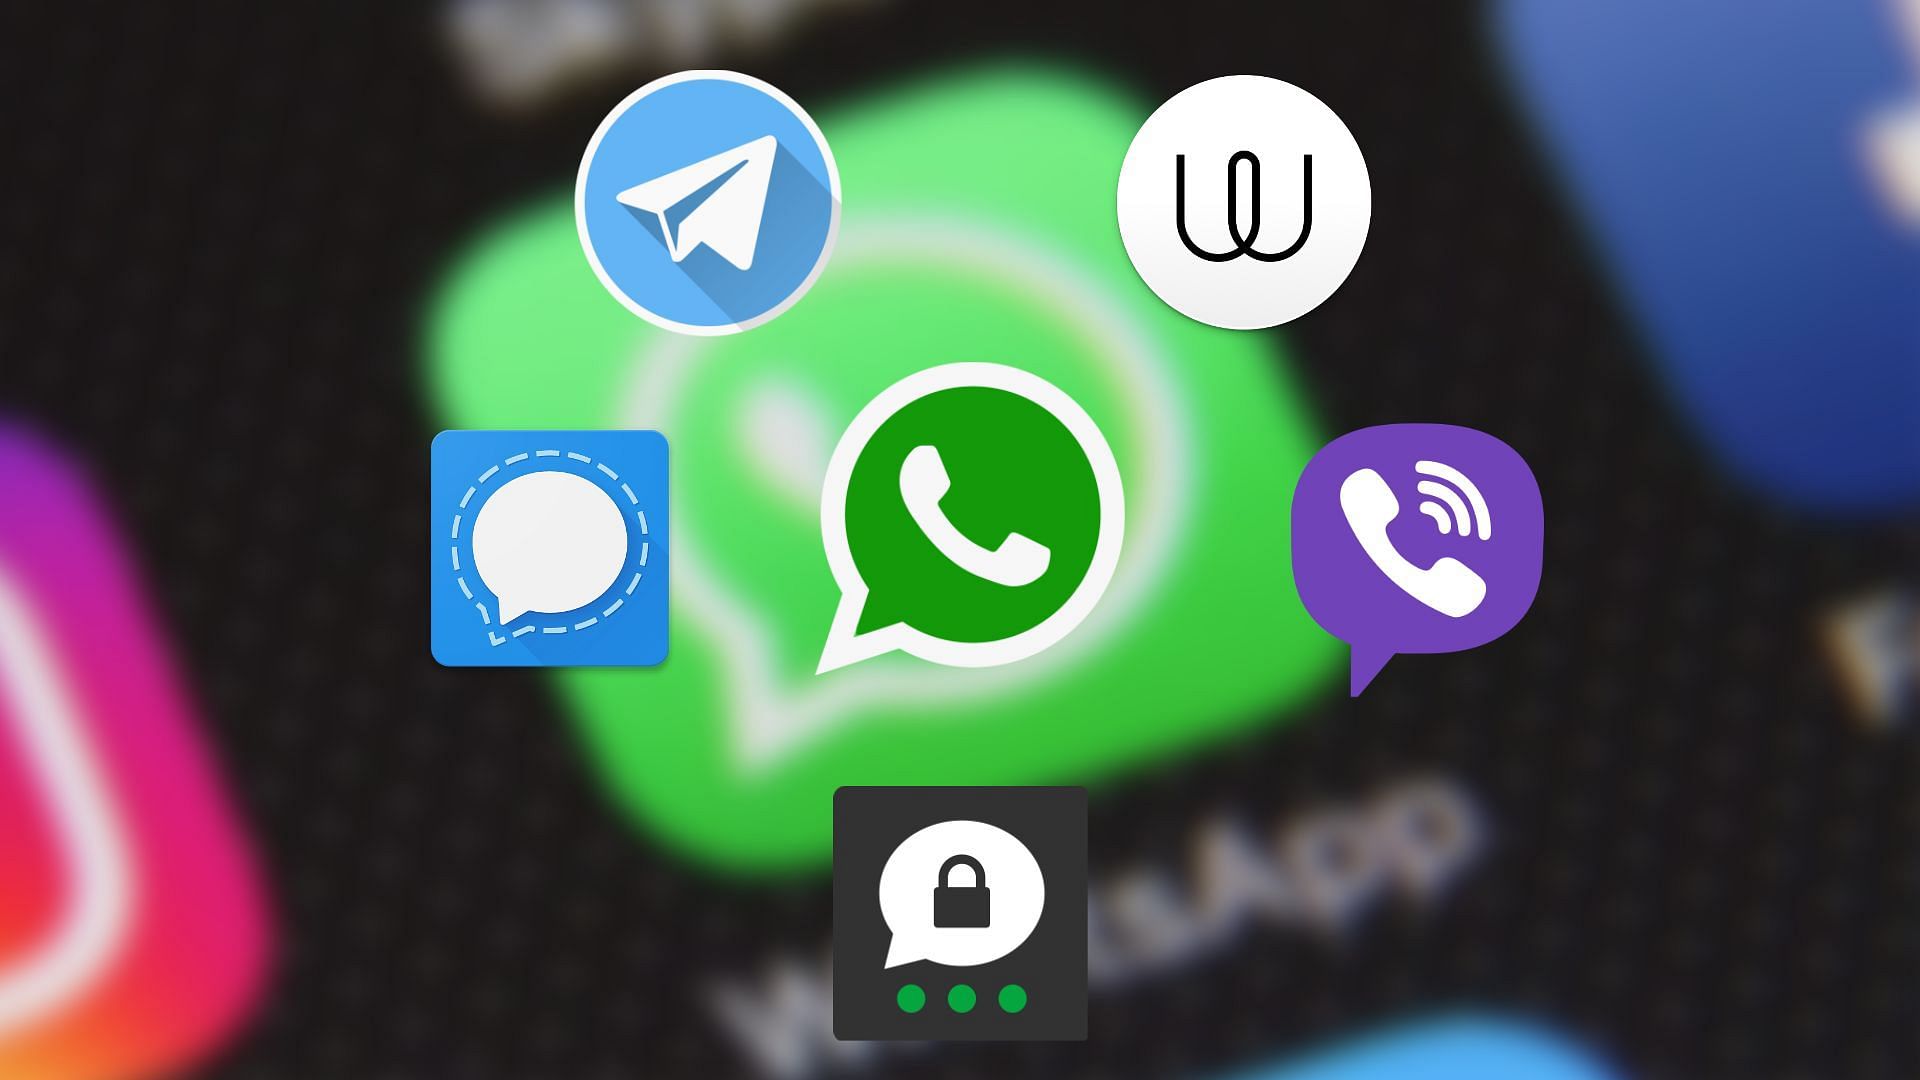 Top 5 WhatsApp alternatives worth checking out in 2023